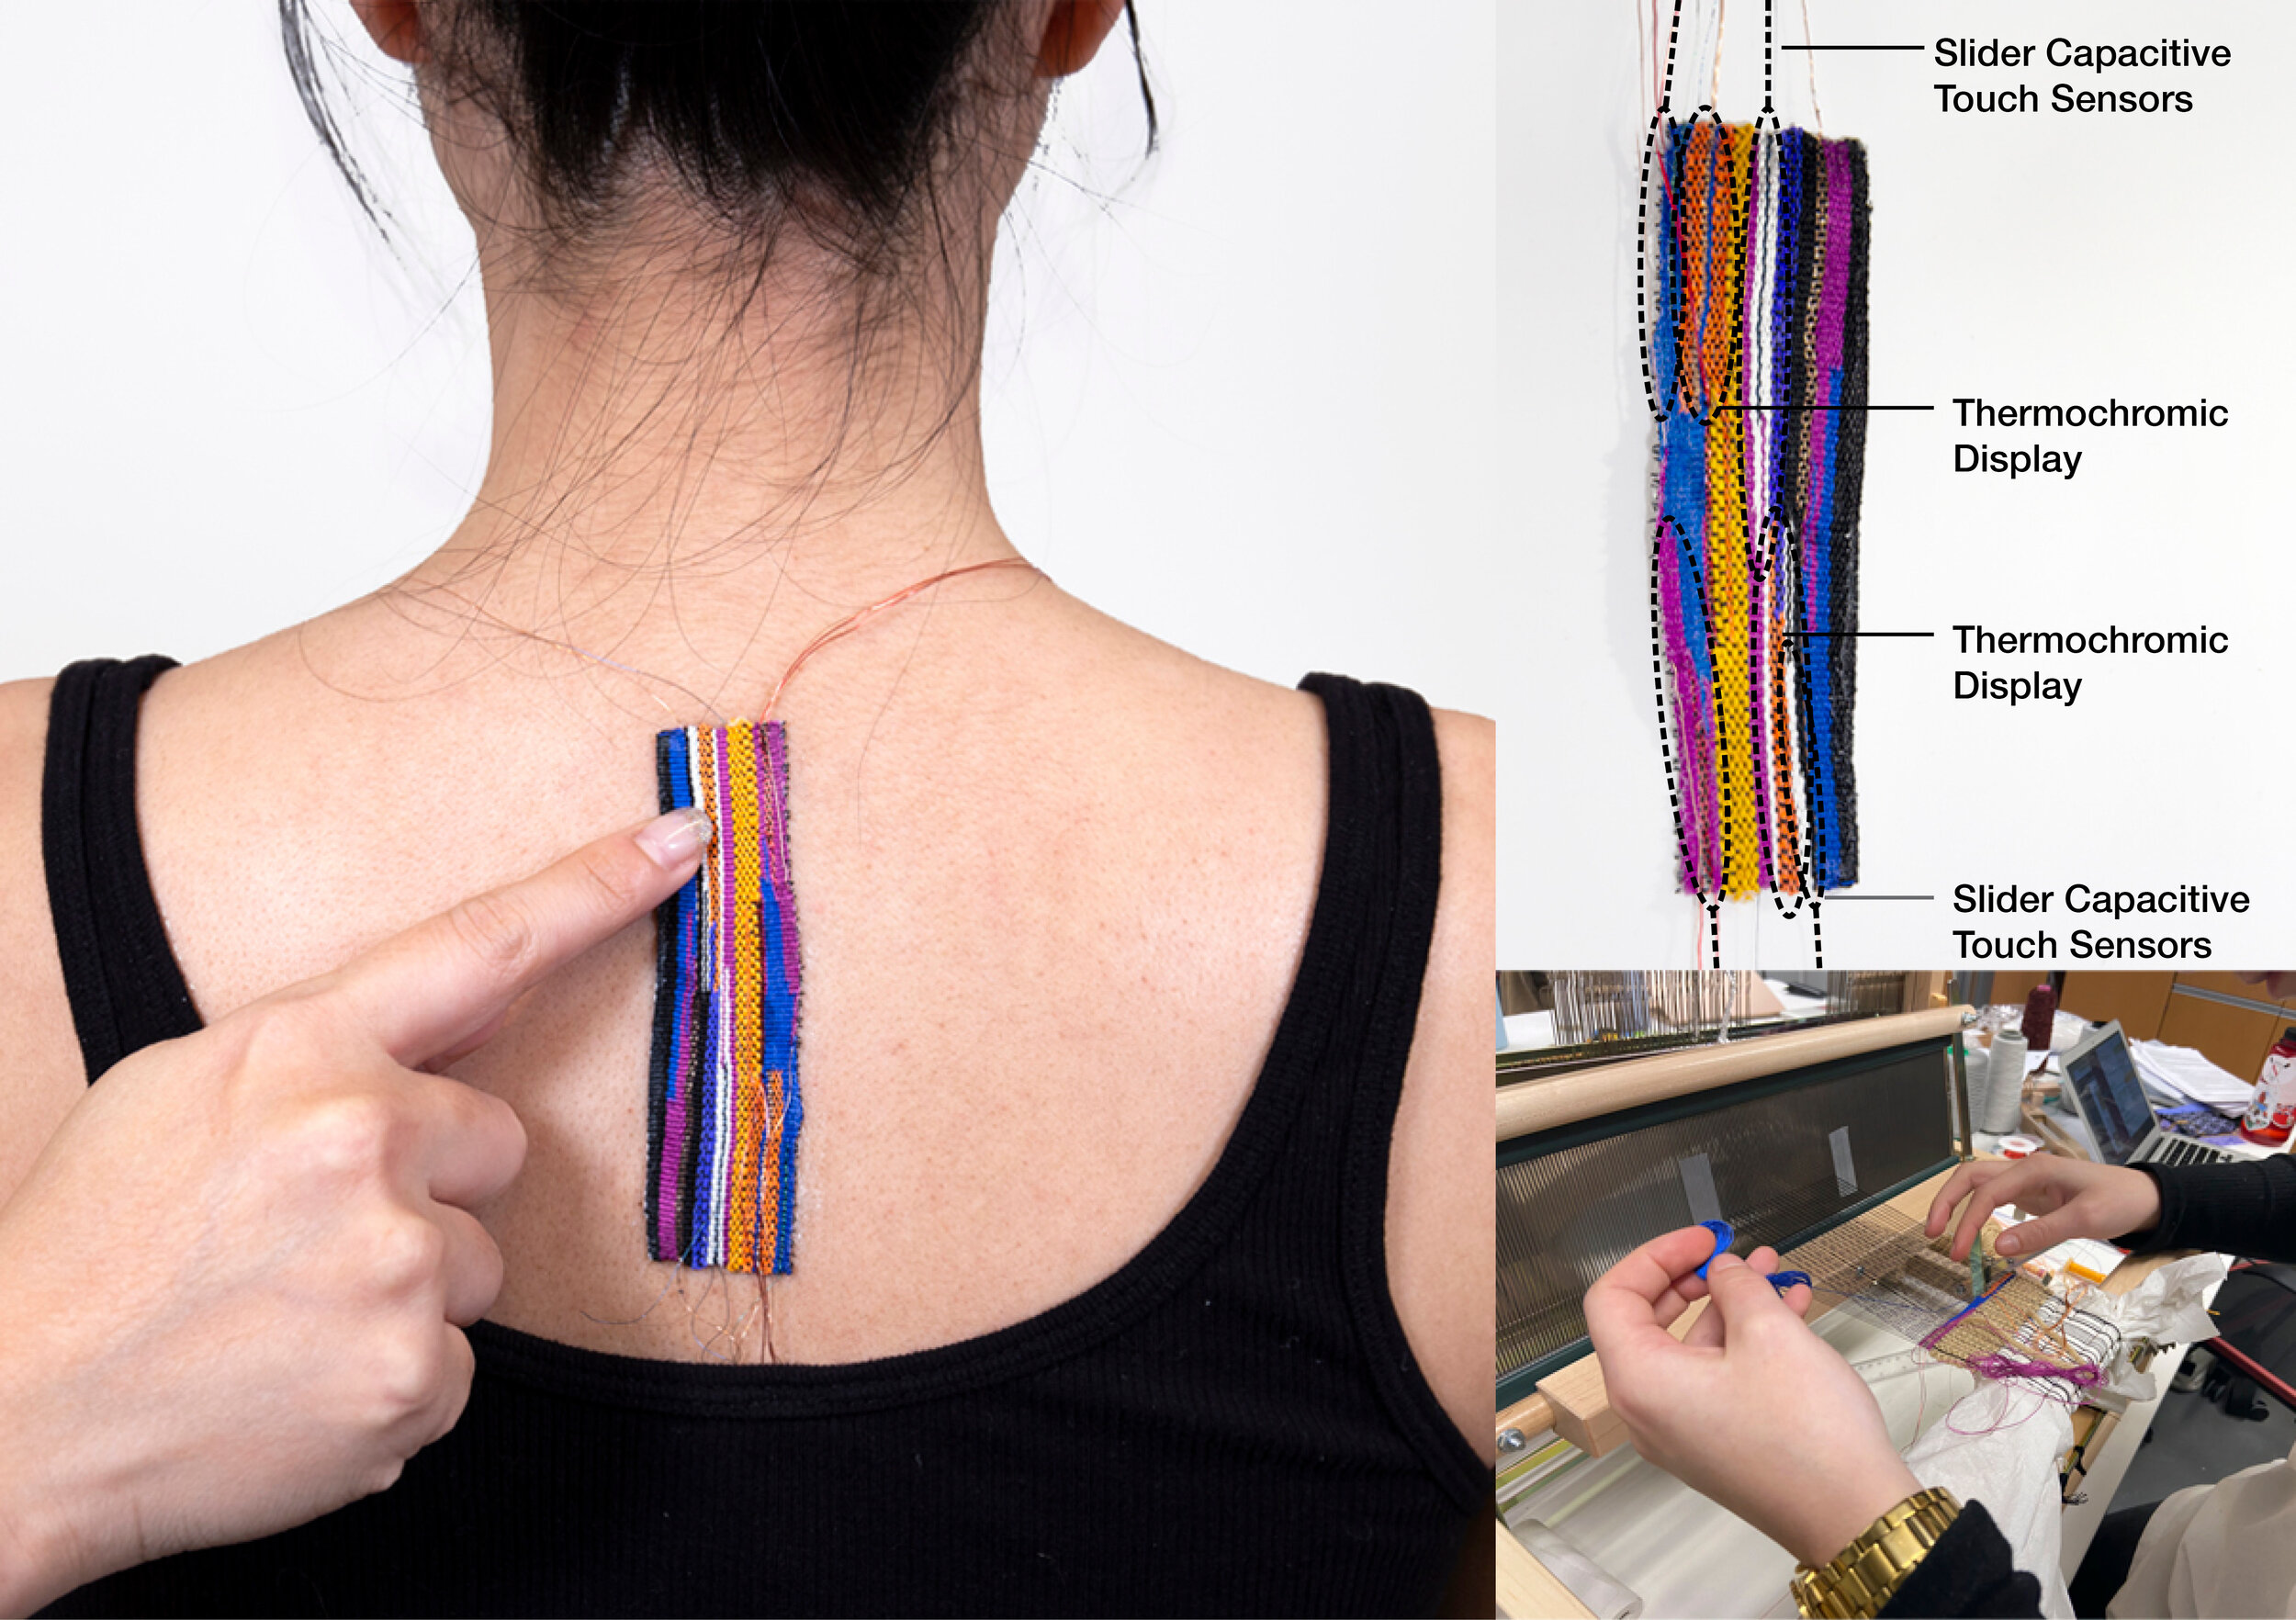  A textile artist’s woven on-skin interface created with the fabrication process developed by the Hybrid Body Lab: A touch sensor on the back woven with tapestry techniques. (Image Credit: Hybrid Body Lab) (License: CC BY-NC-SA 4.0) 